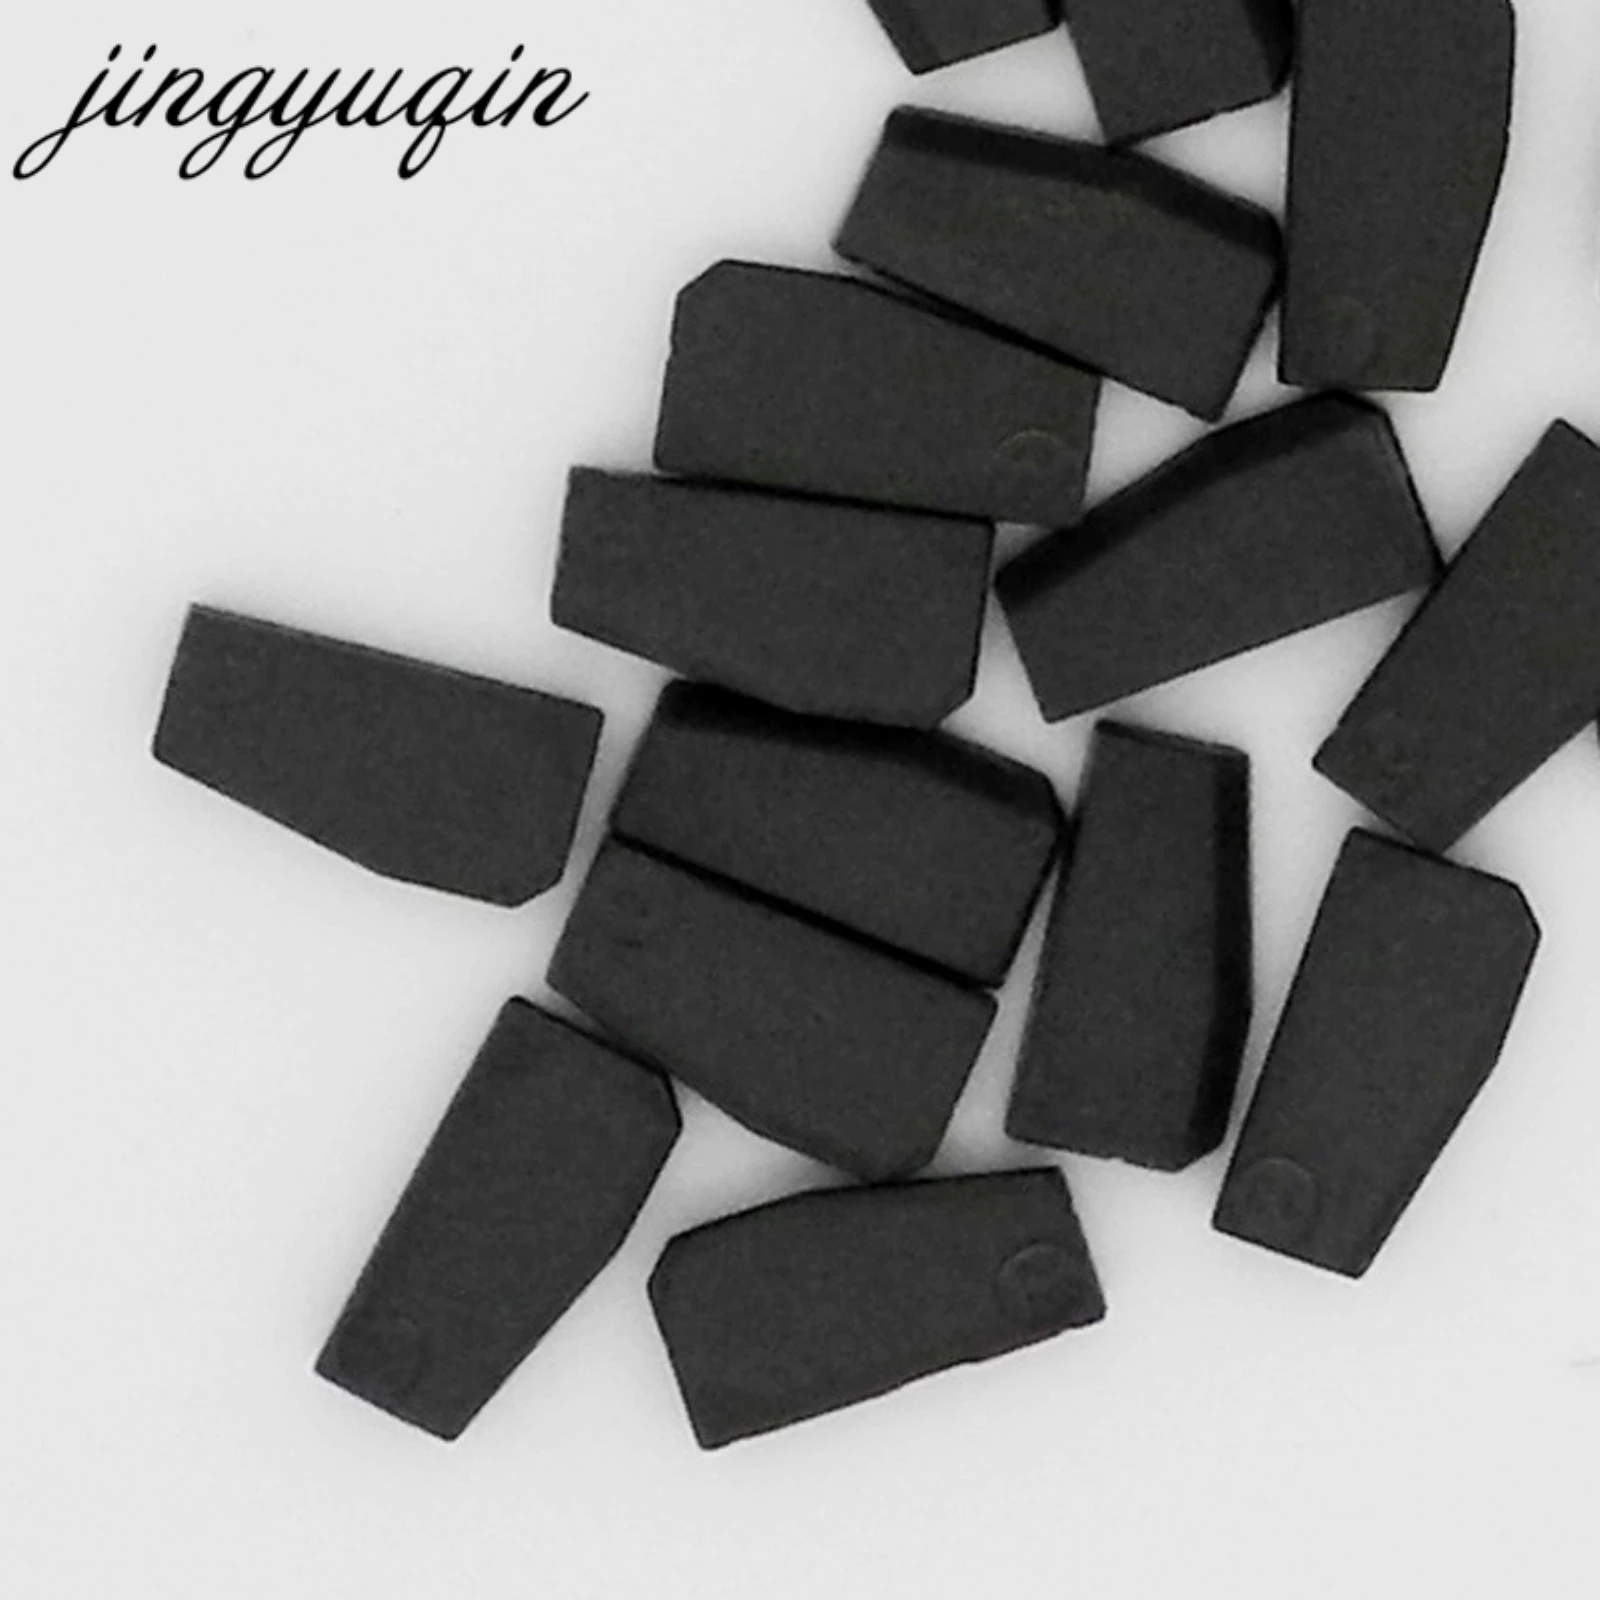 ignition coil pack jingyuqin 10pcs/lot Car Key Chip T5 Ceramic Cloneable Transponder Chip ID T5-ID20 ignition coil pack